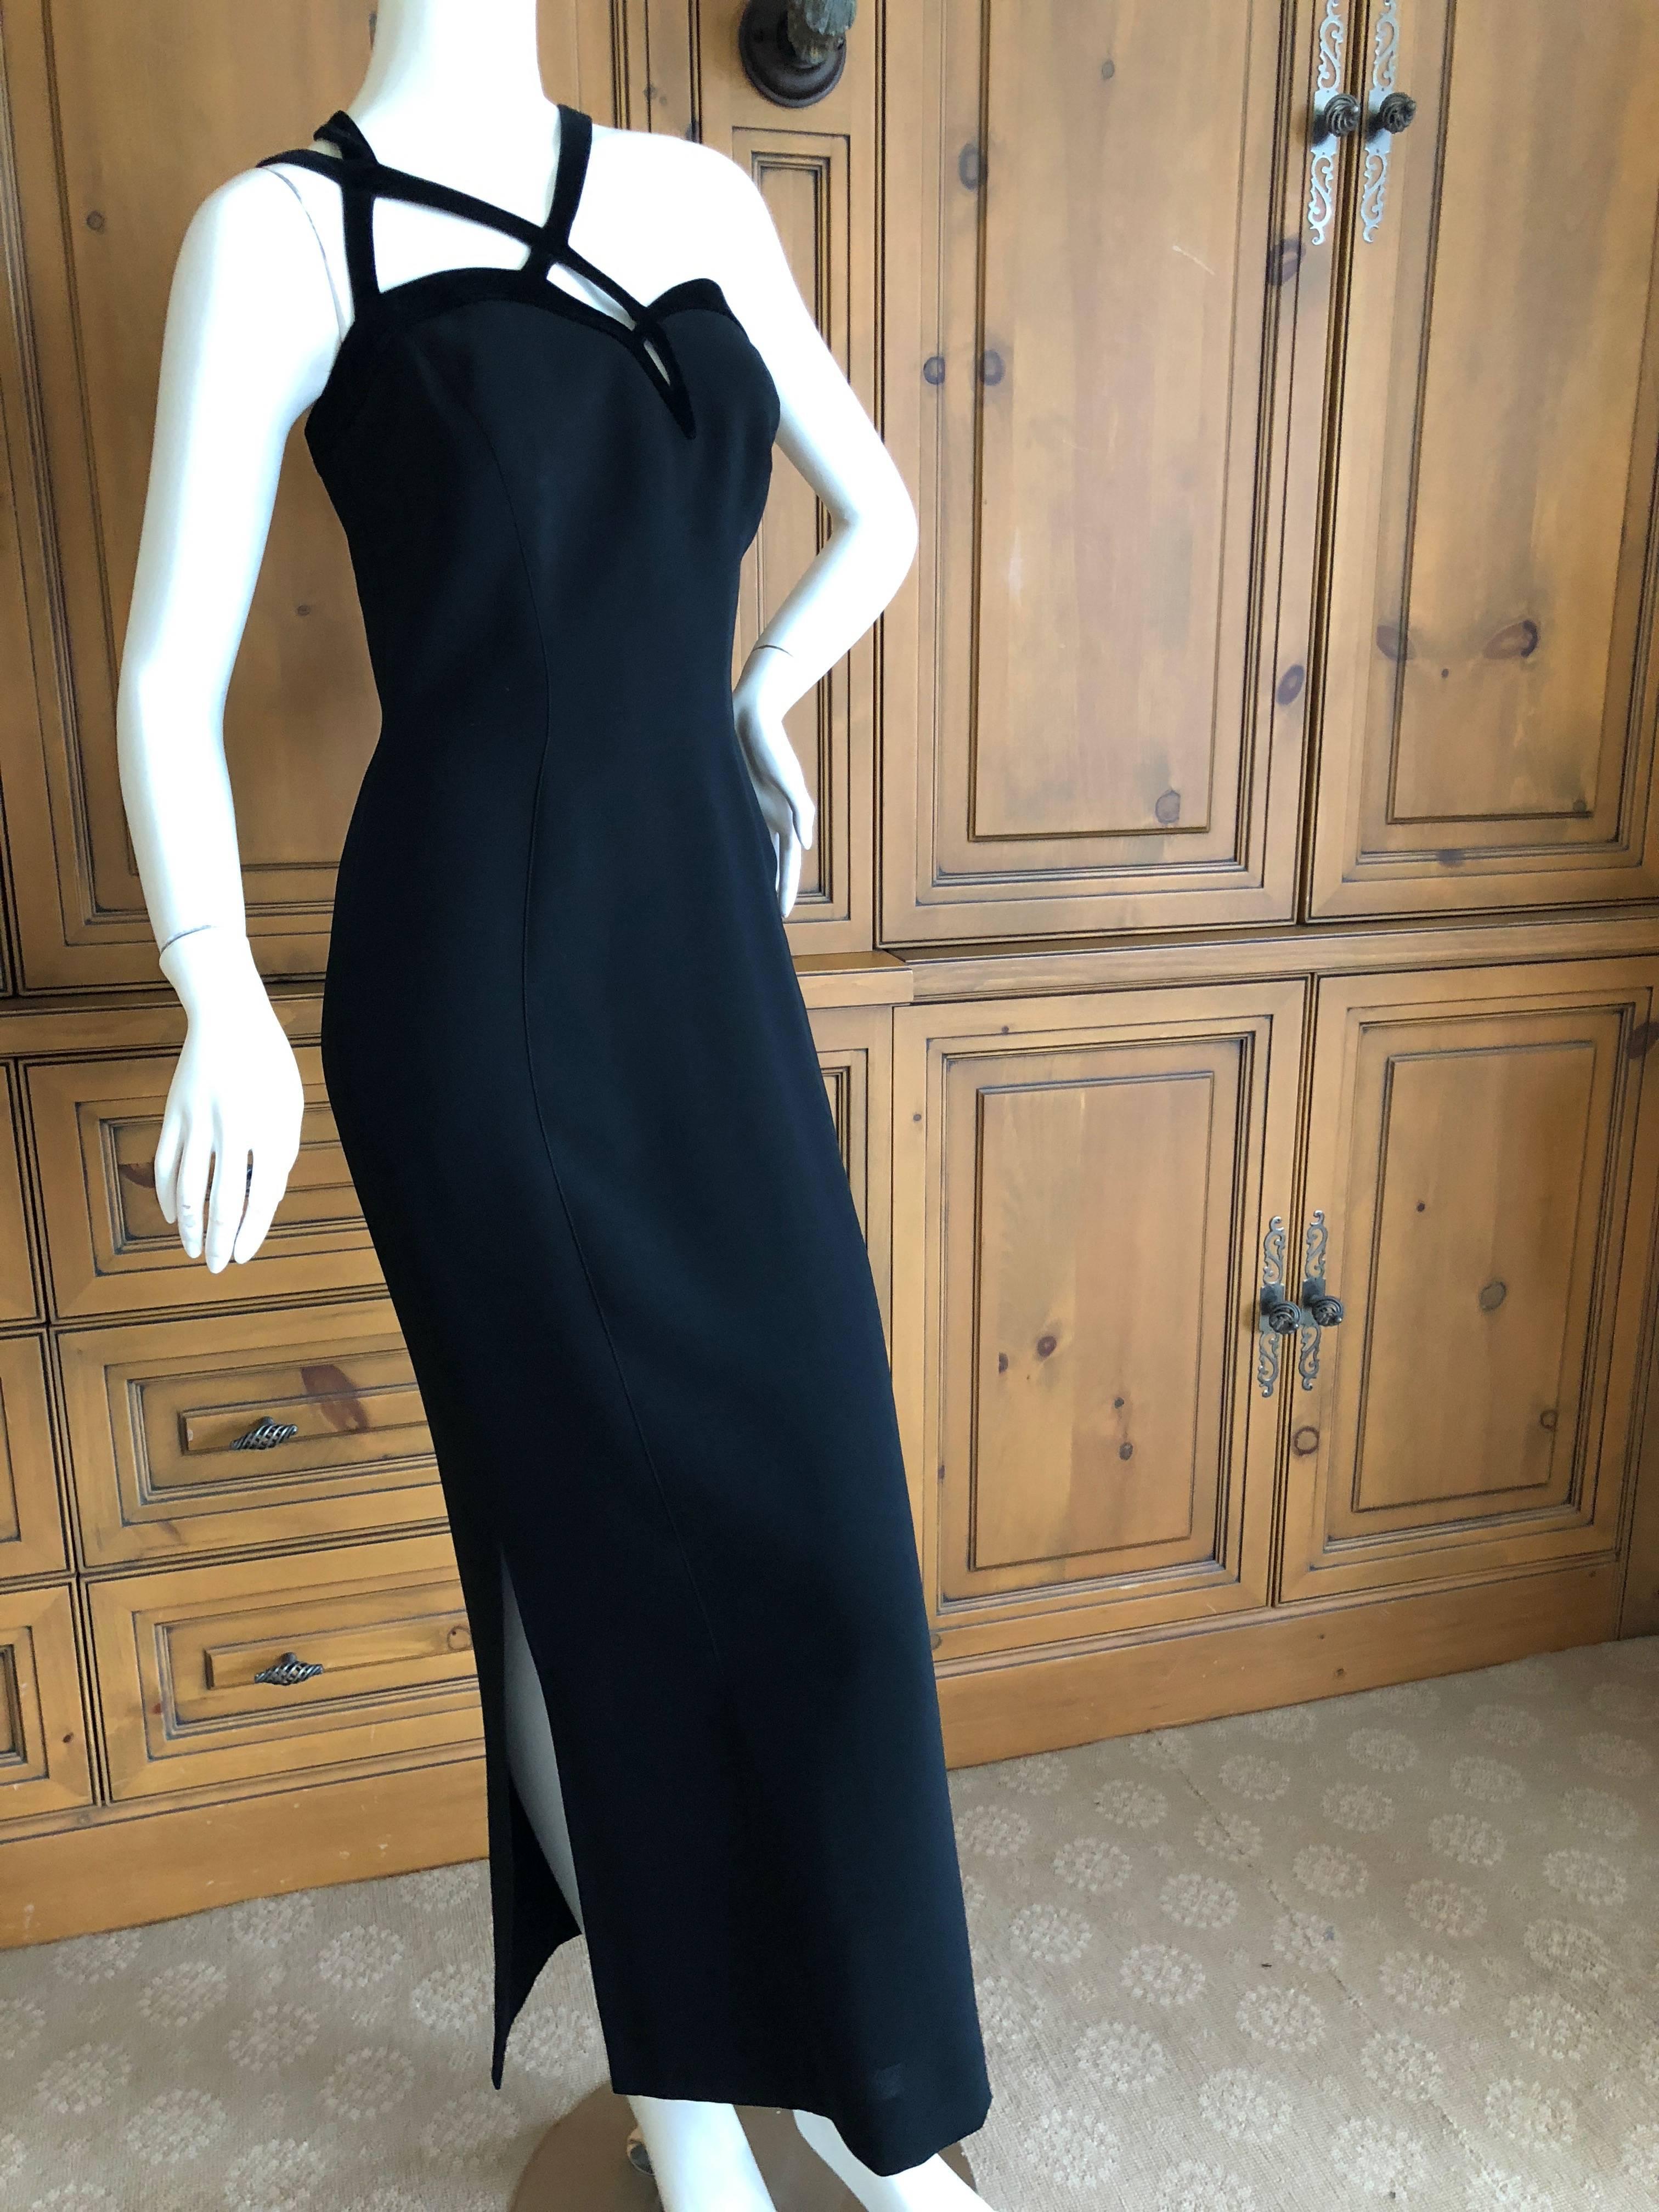 Thierry Mugler Vintage Velvet Trimmed Evening Dress In Excellent Condition For Sale In Cloverdale, CA